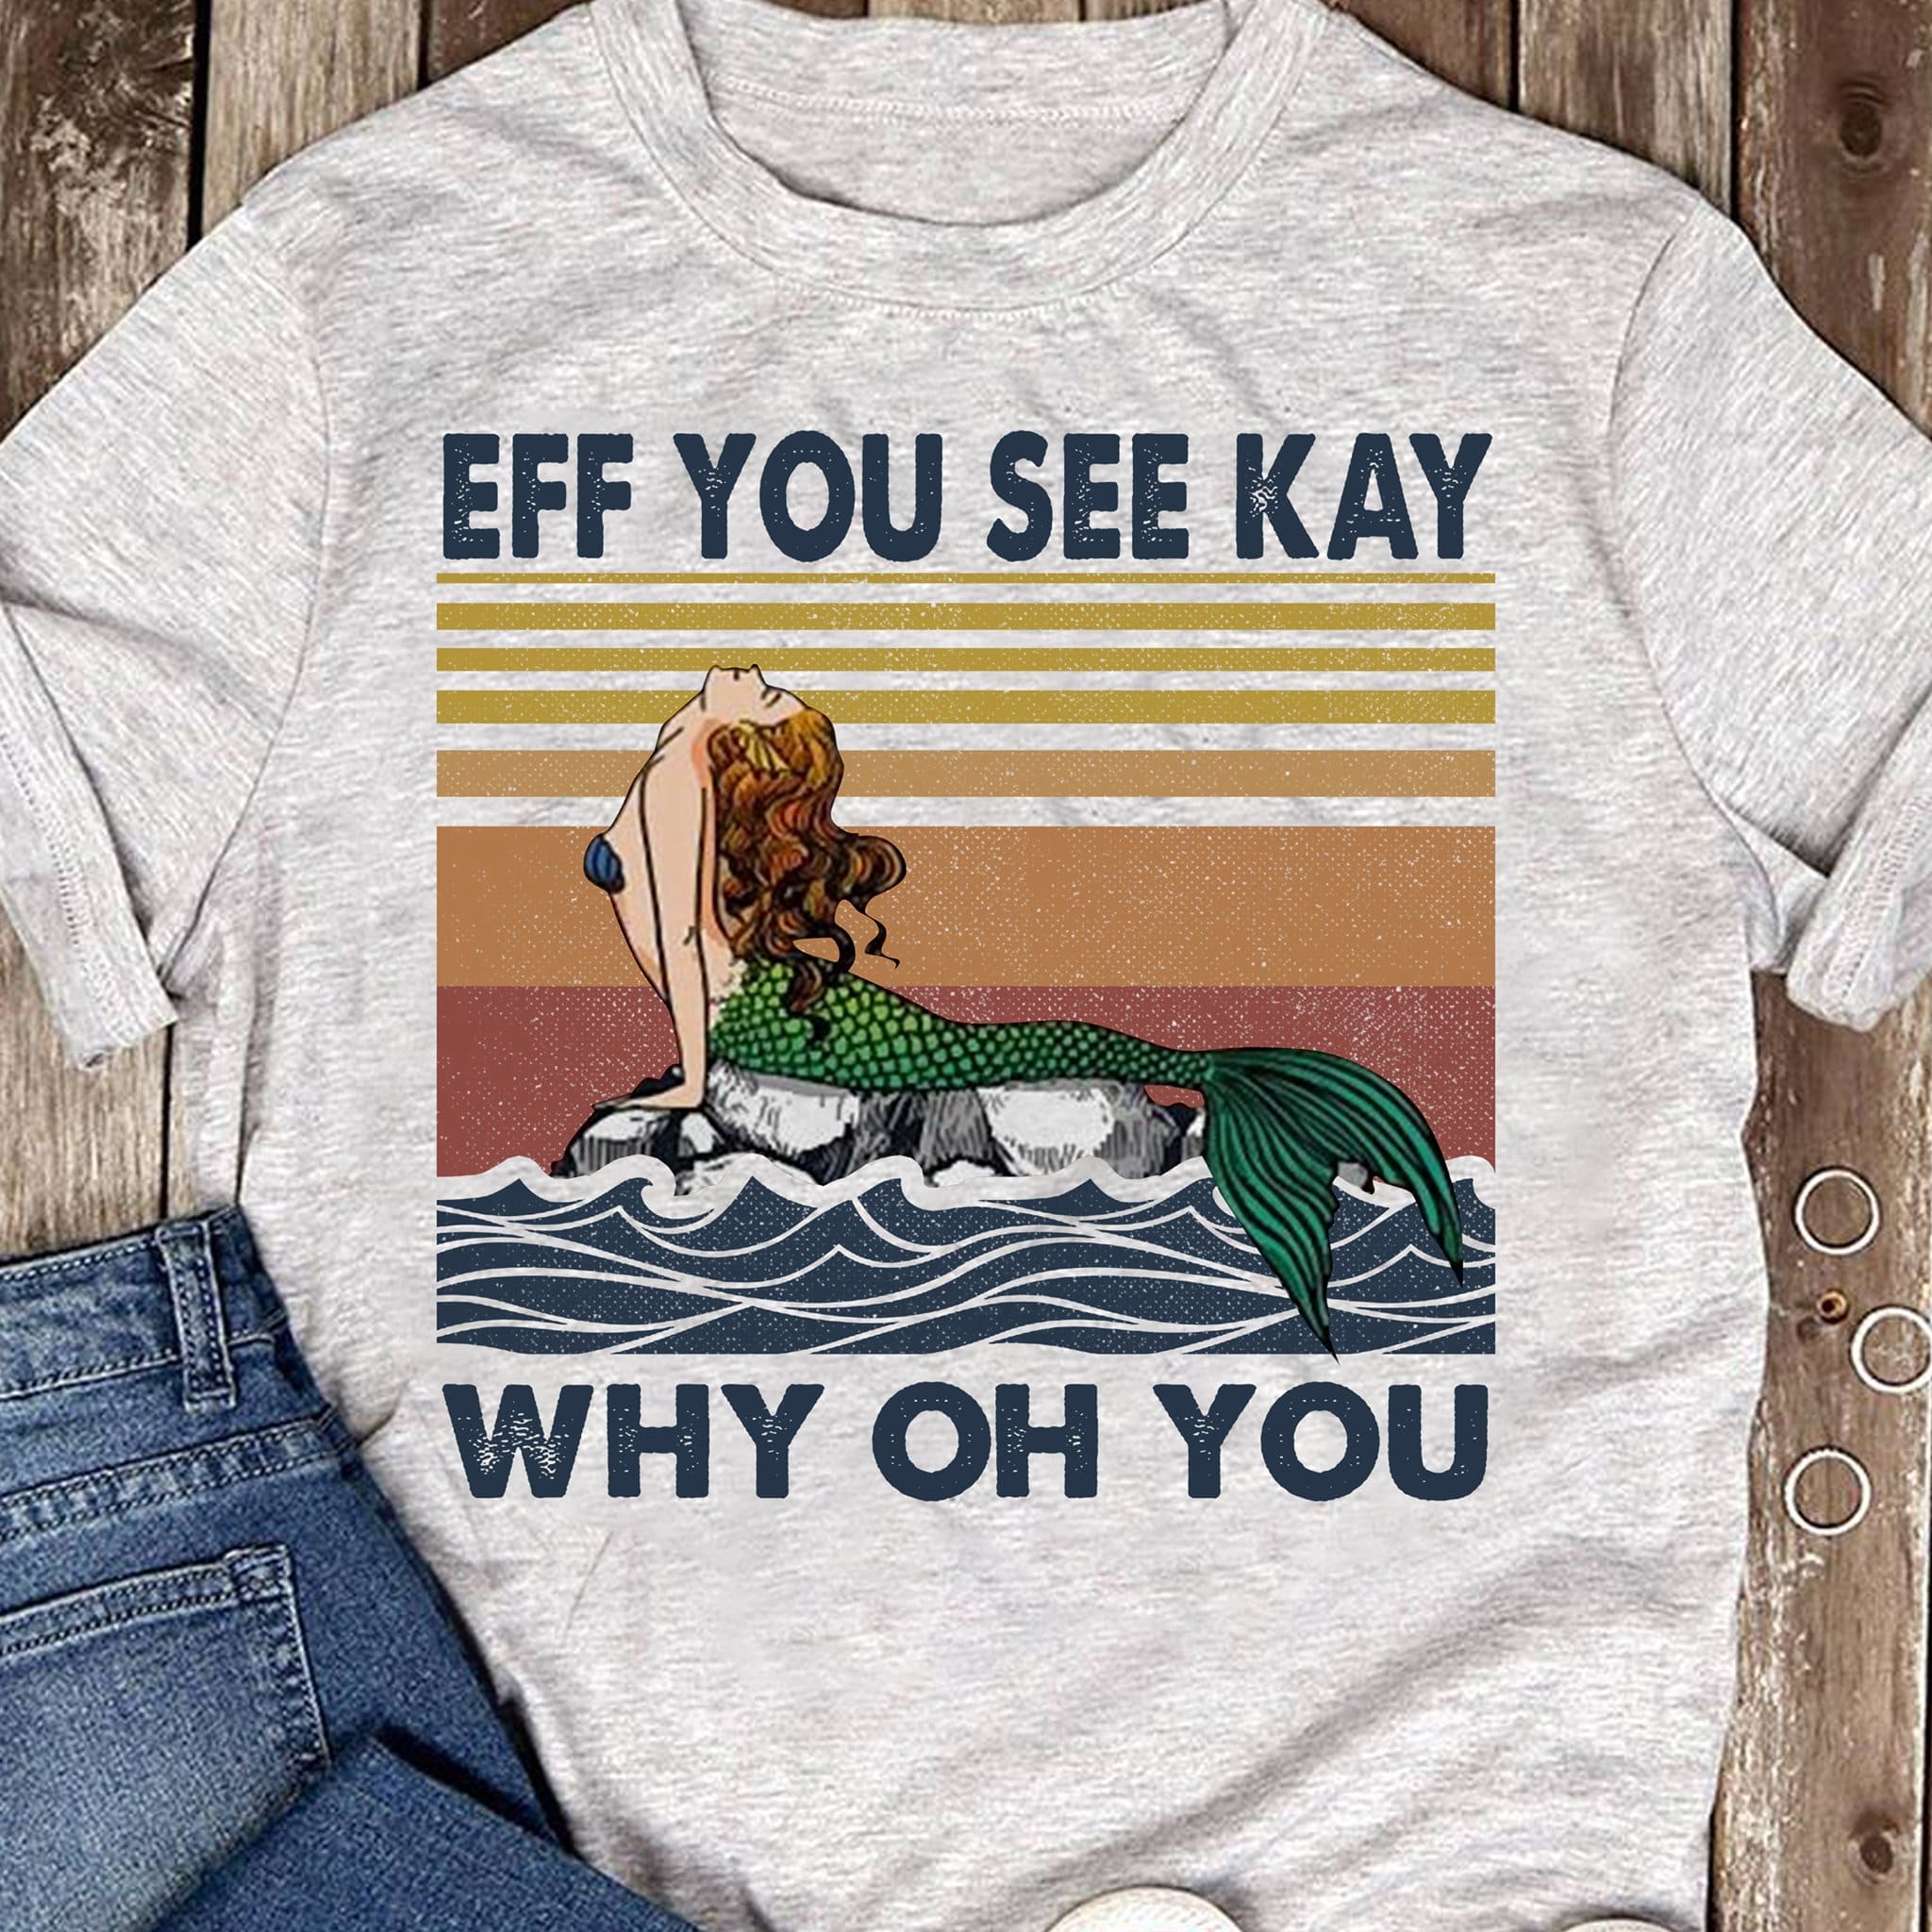 Eff you see kay, why oh your - Beautiful mermaid